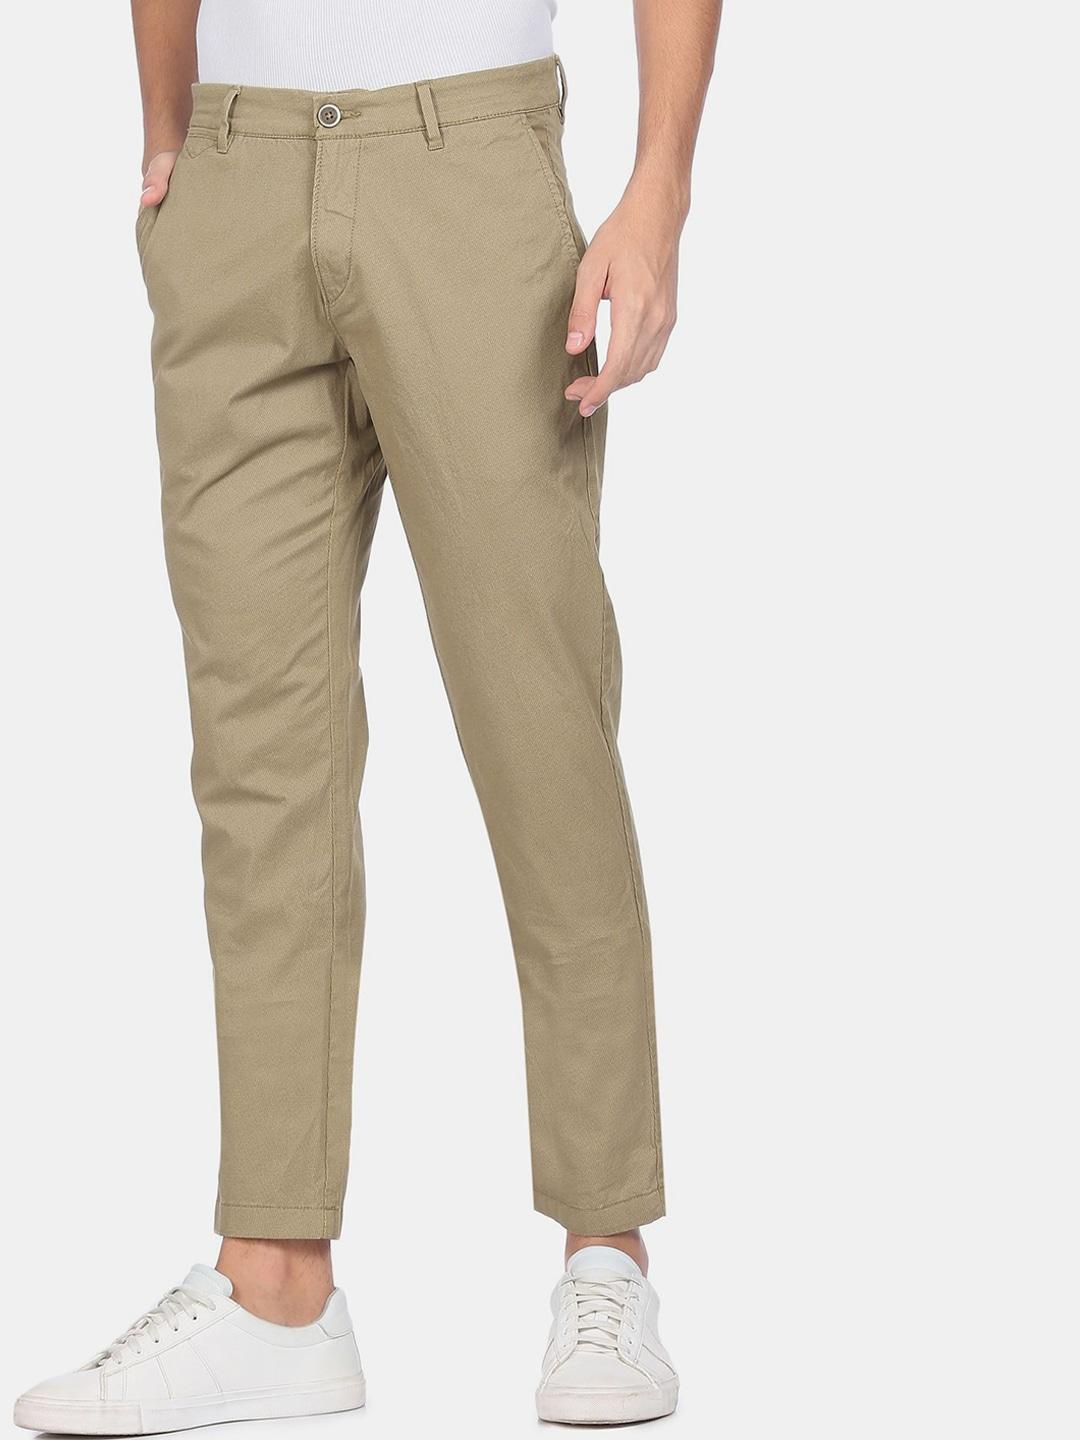 u-s-polo-assn-men-olive-green-printed-casual-trouser